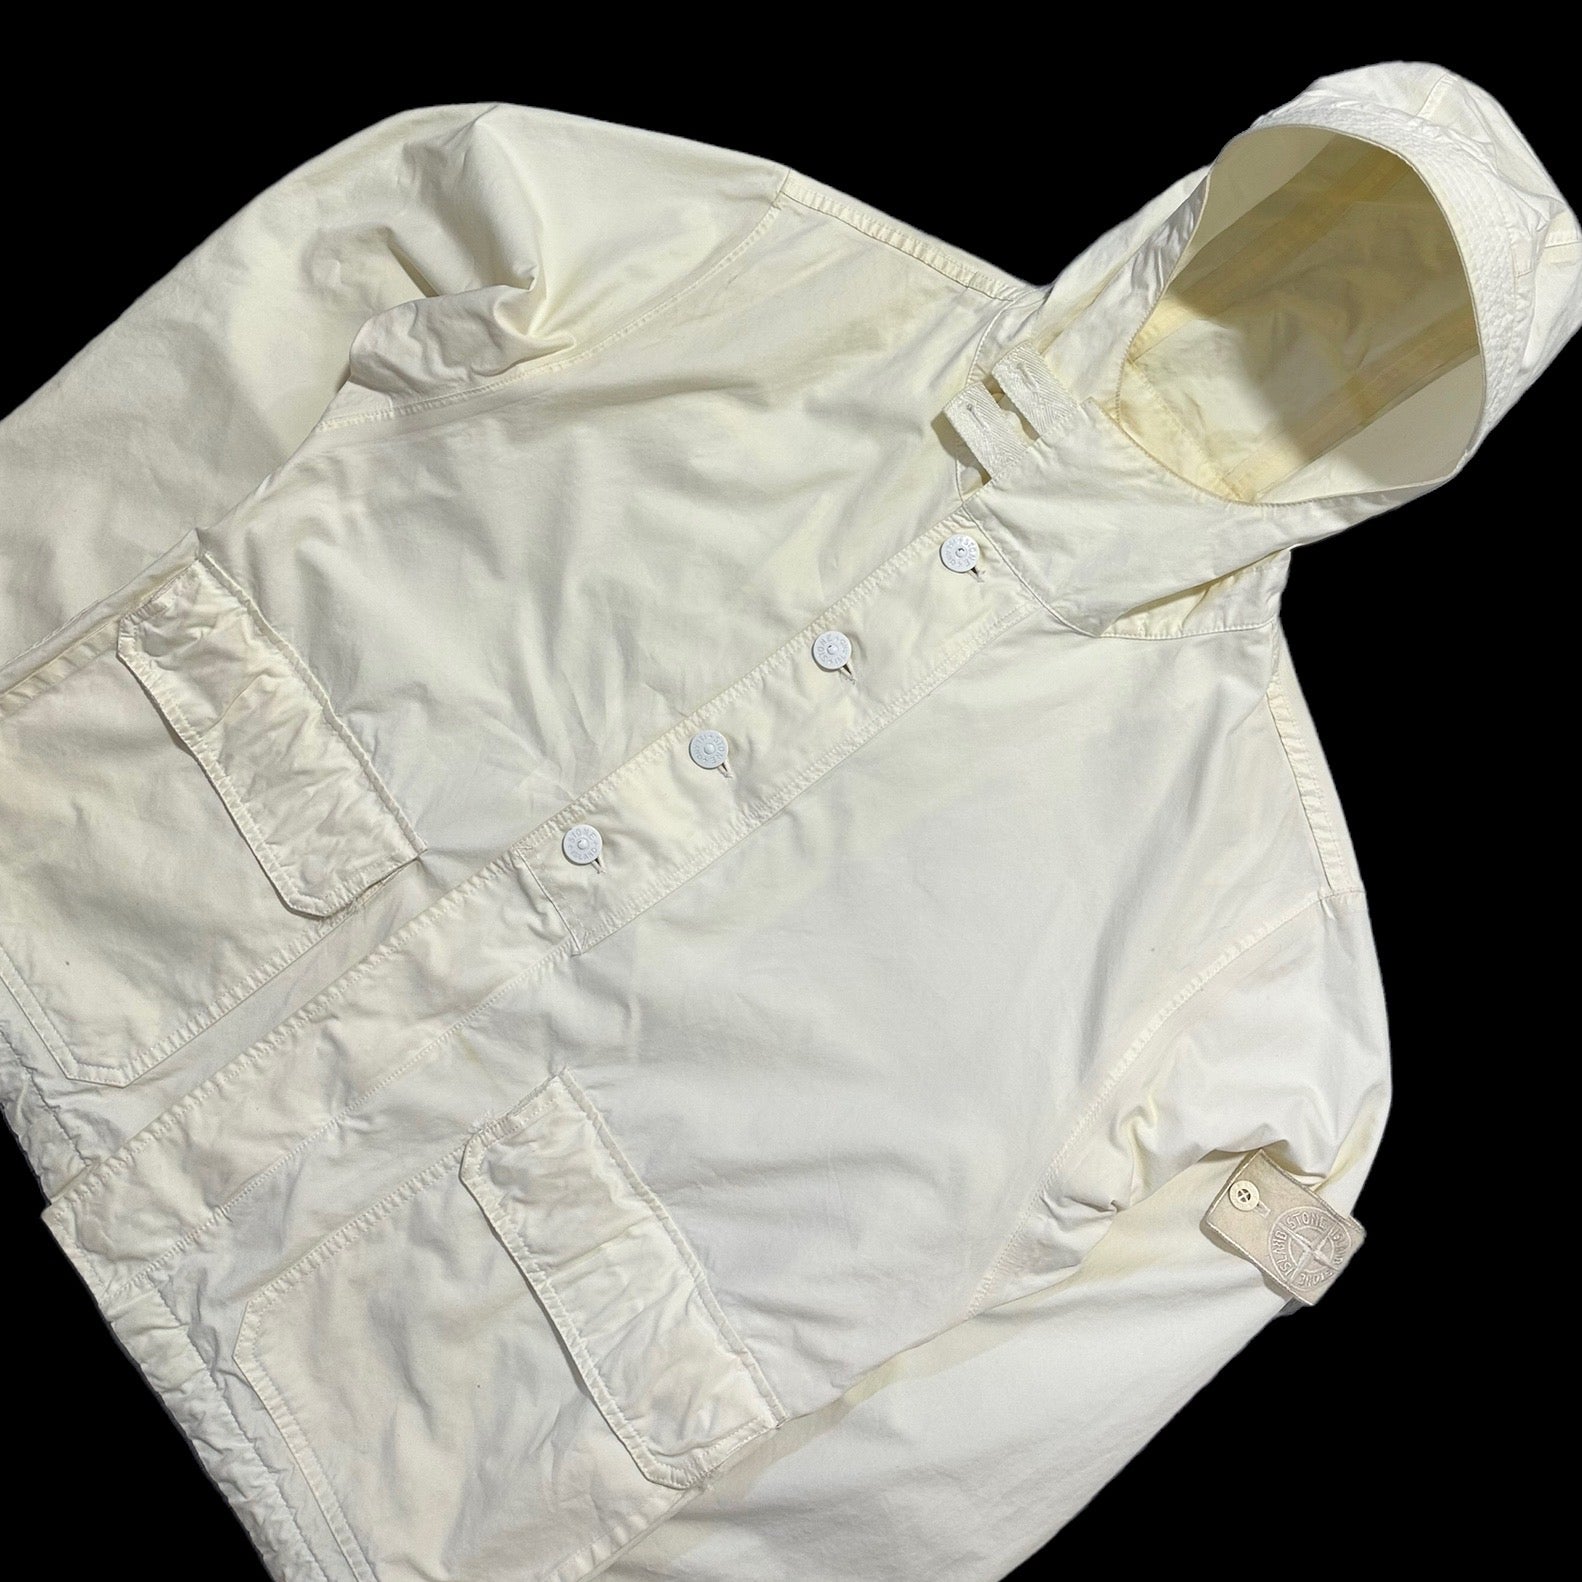 Stone Island Ghost Ventile White Zip Up Jacket